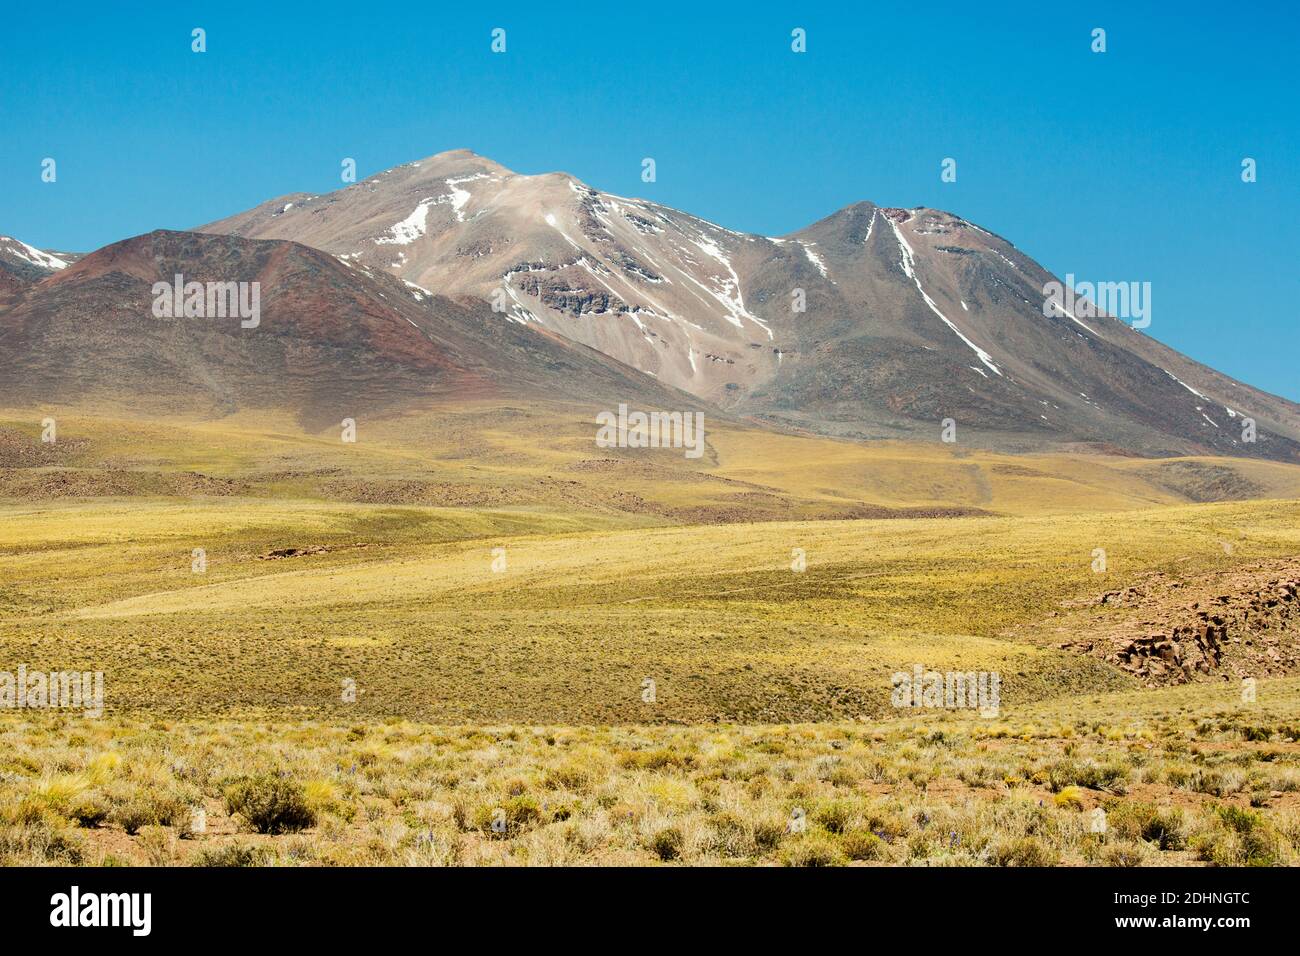 Volcano Lascar rises above the coiron grass plains of the altiplano near Socaire, Andes, Chile Stock Photo